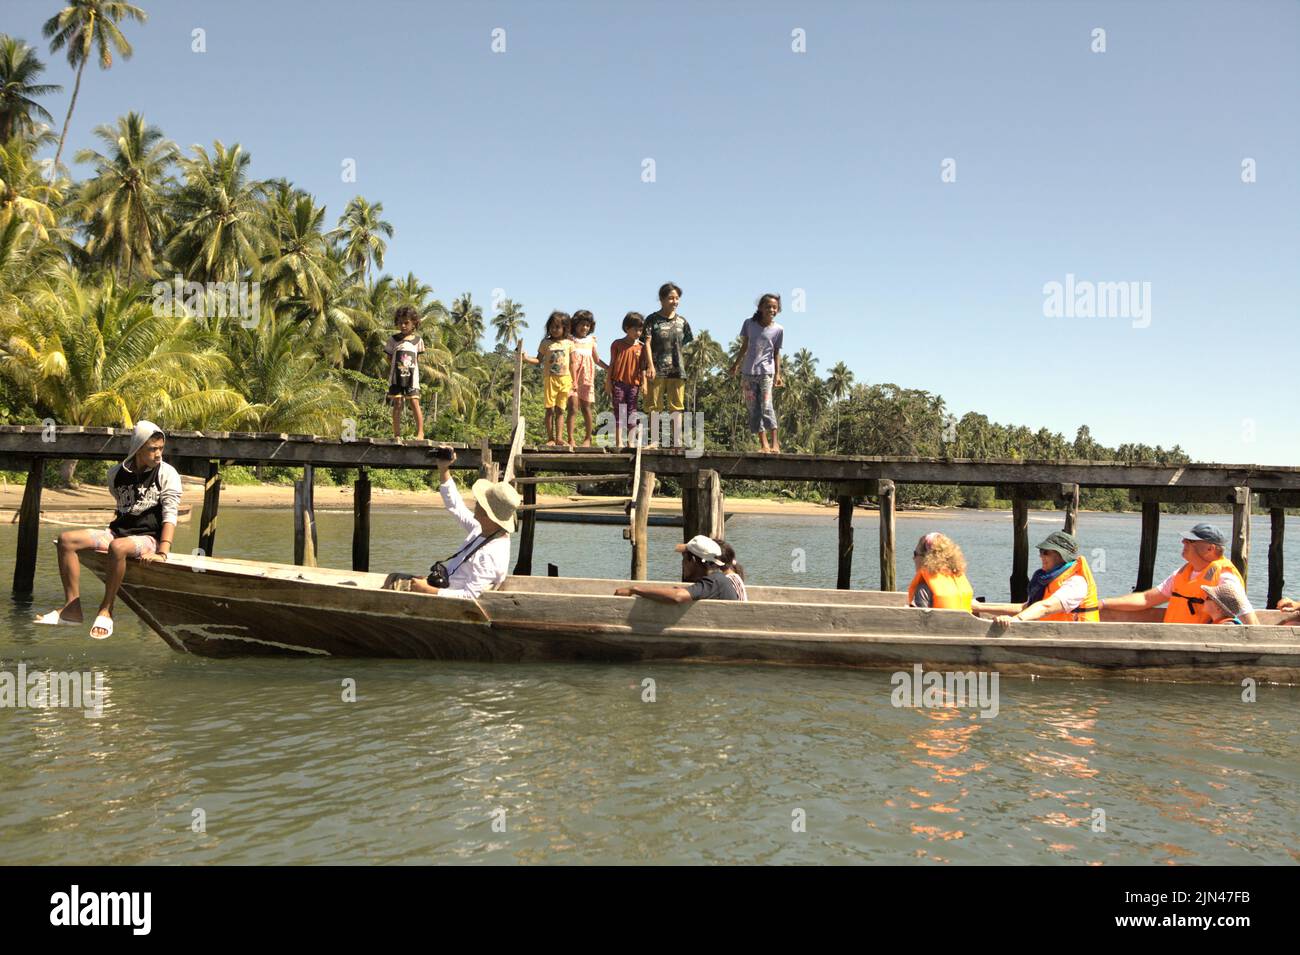 Children standing on a jetty as a boat carrying tourists is arriving Horale village in Seram Utara Barat, Maluku Tengah, Maluku, Indonesia. Stock Photo